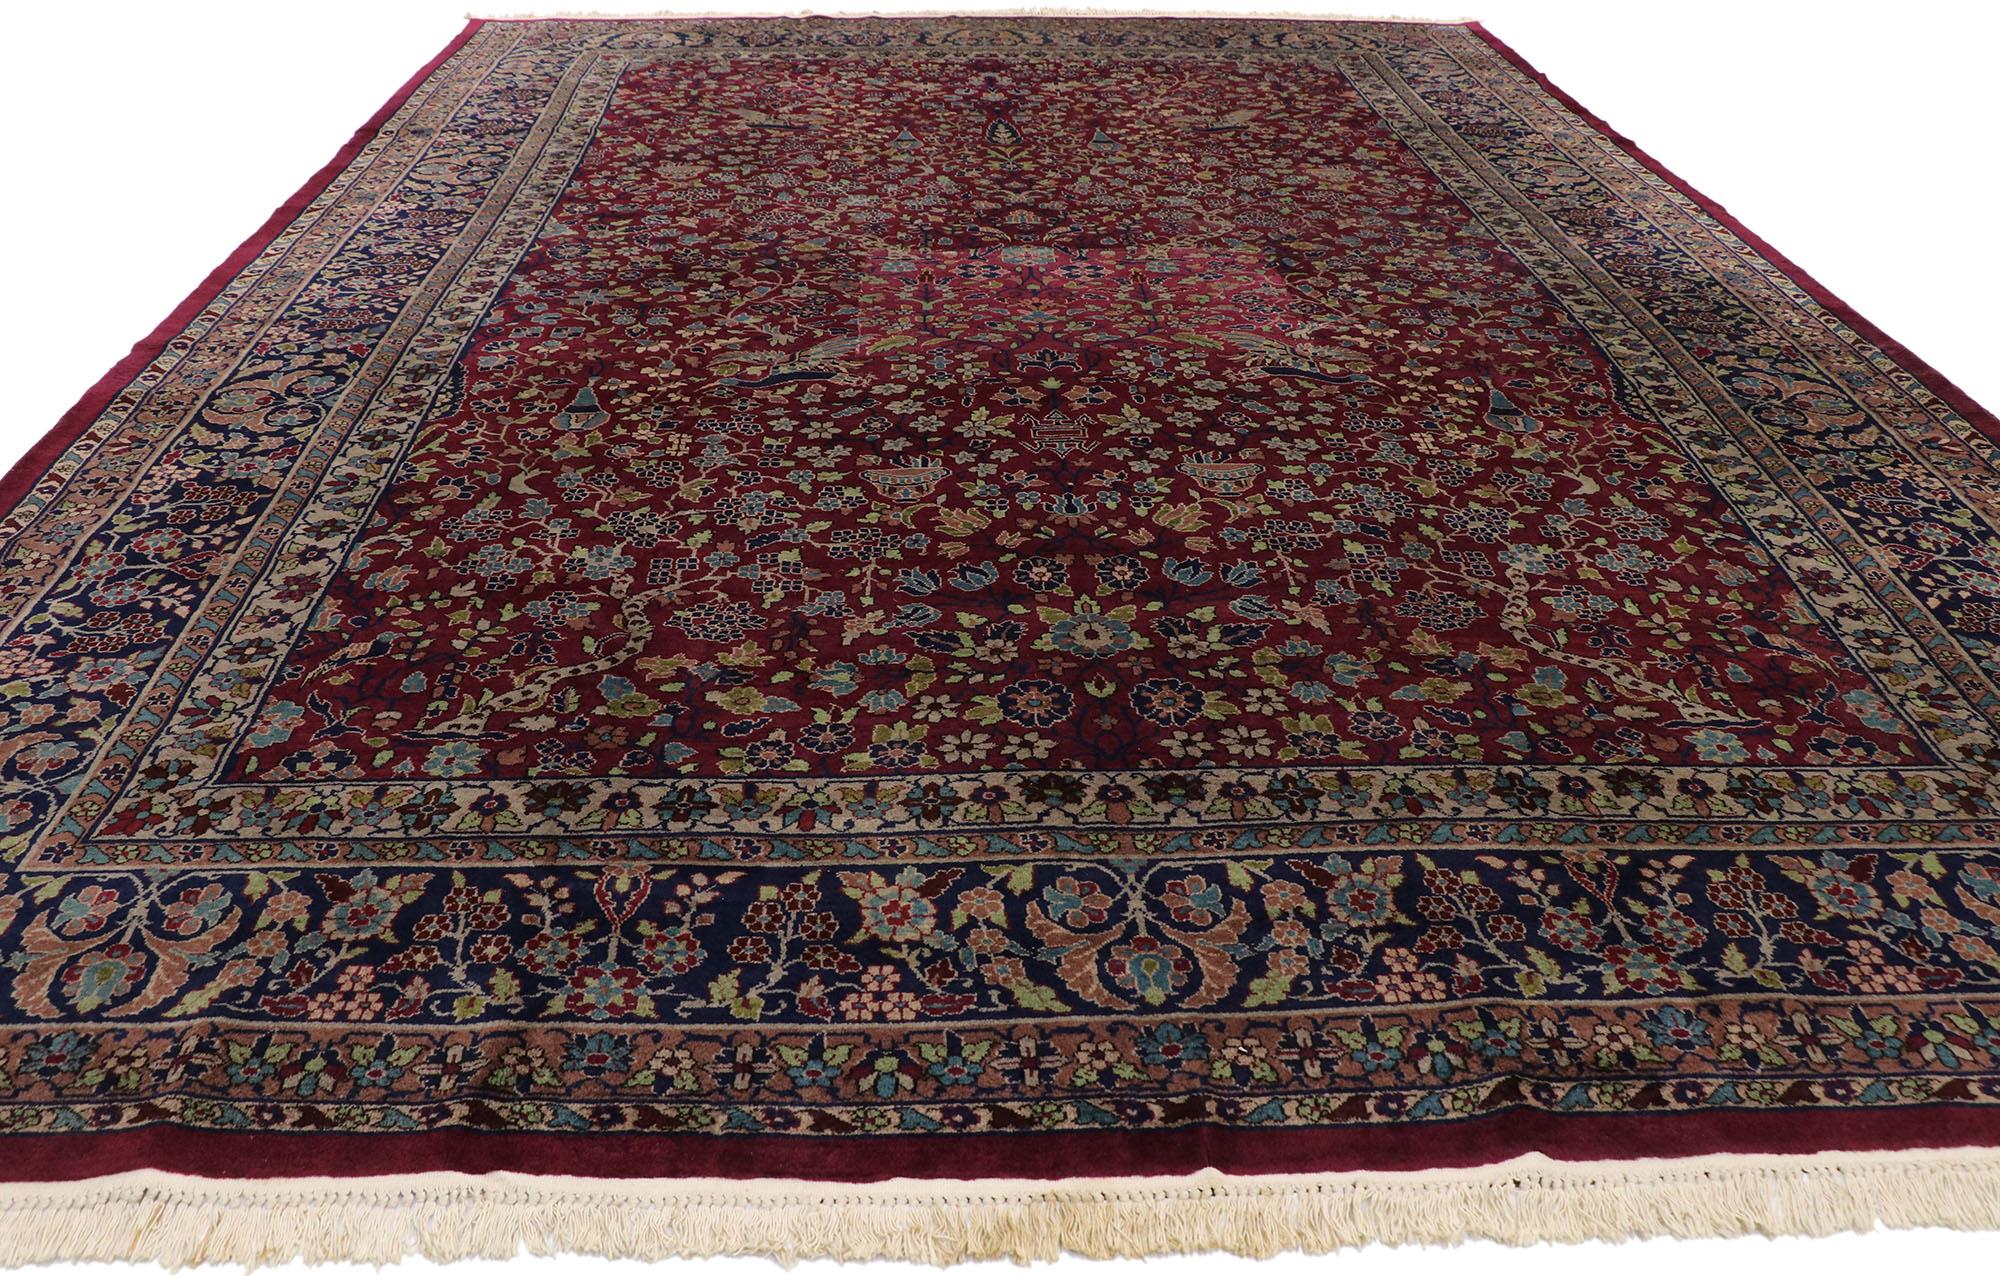 Antique Indian Agra Rug with Victorian Renaissance Style In Good Condition For Sale In Dallas, TX